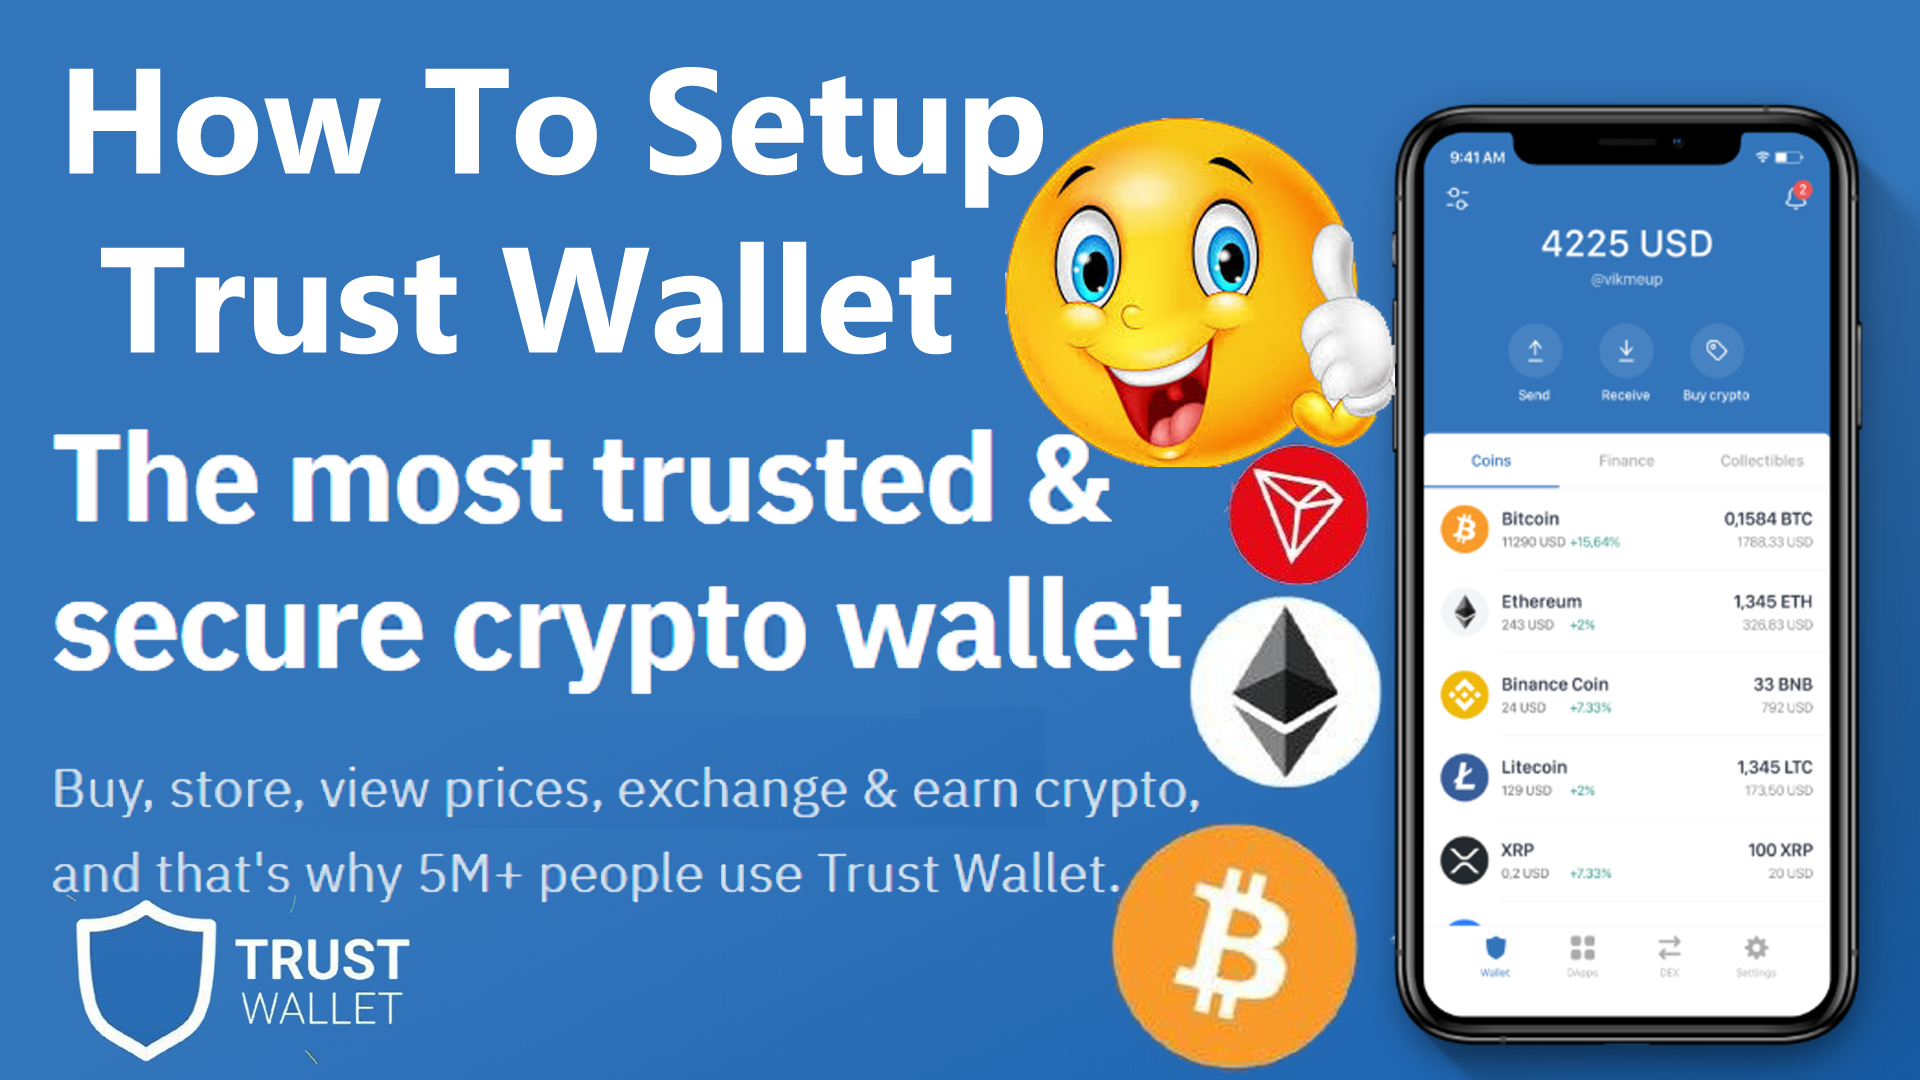 How To Set Up A Crypto Wallet? : How To Set Up And Use ...